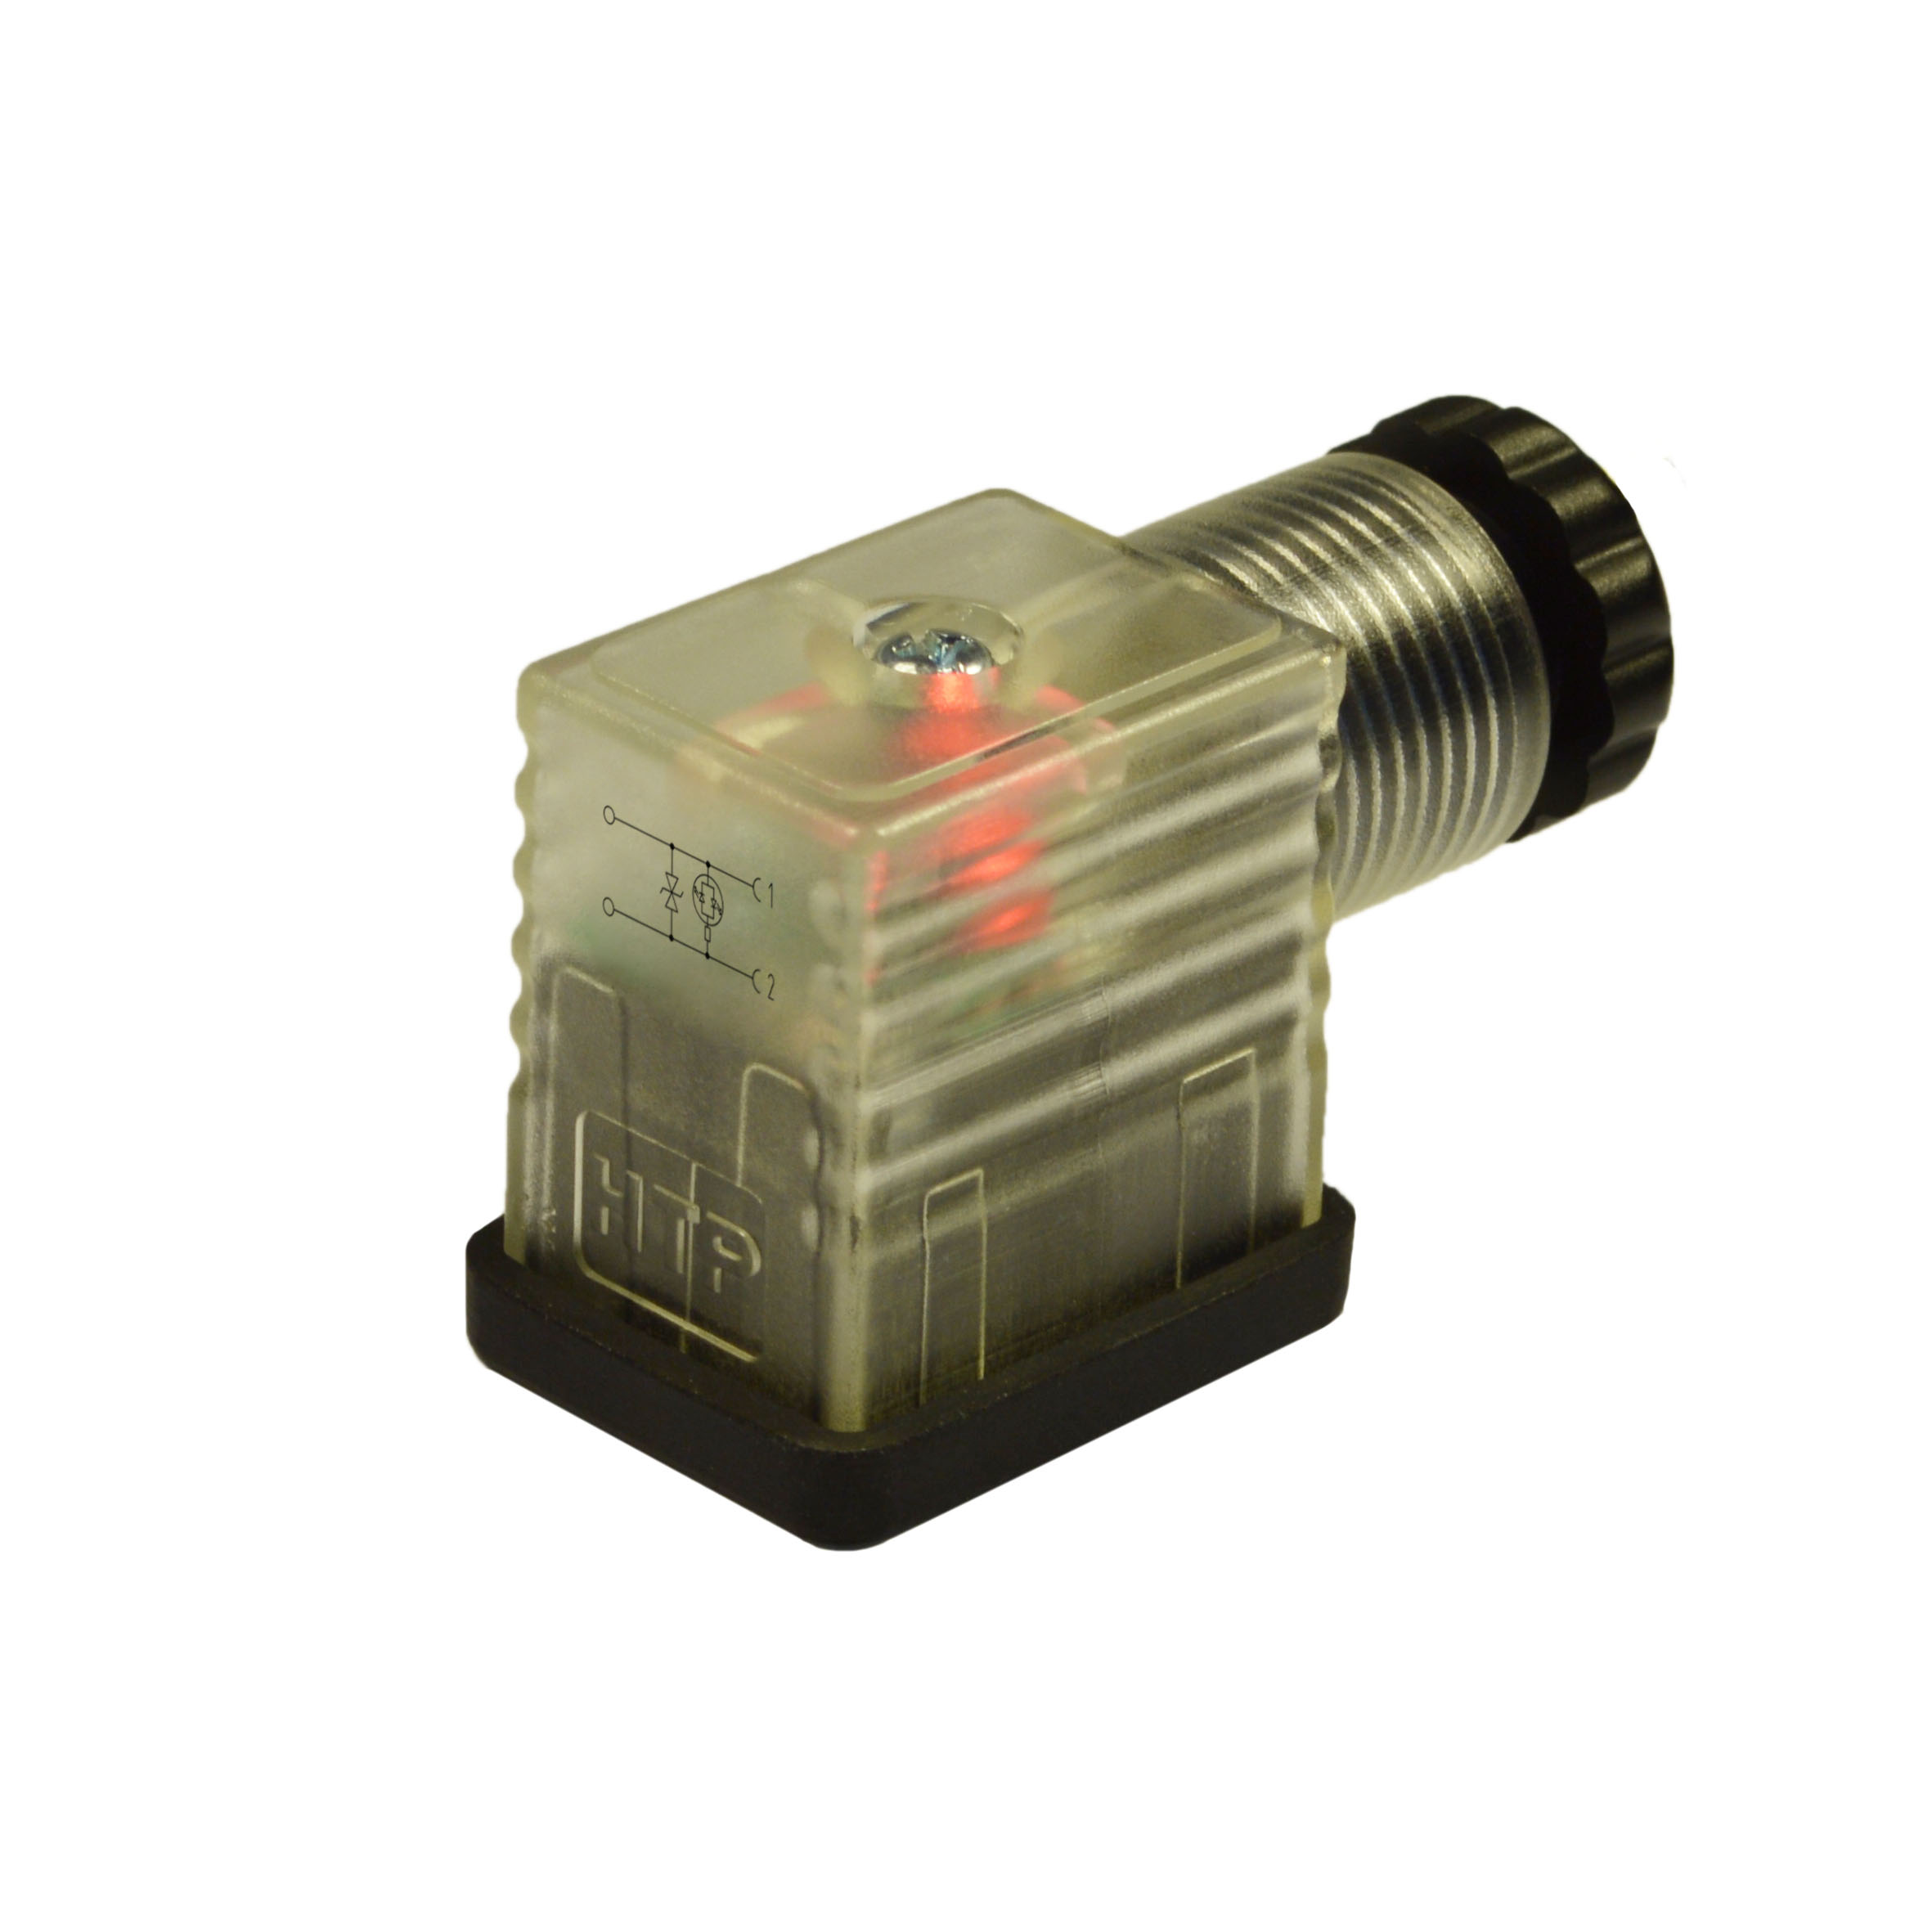 EN175301-803(typeB)field attachable,2p+PE(h.12),red LED+transient,24VAC/DC,PG9